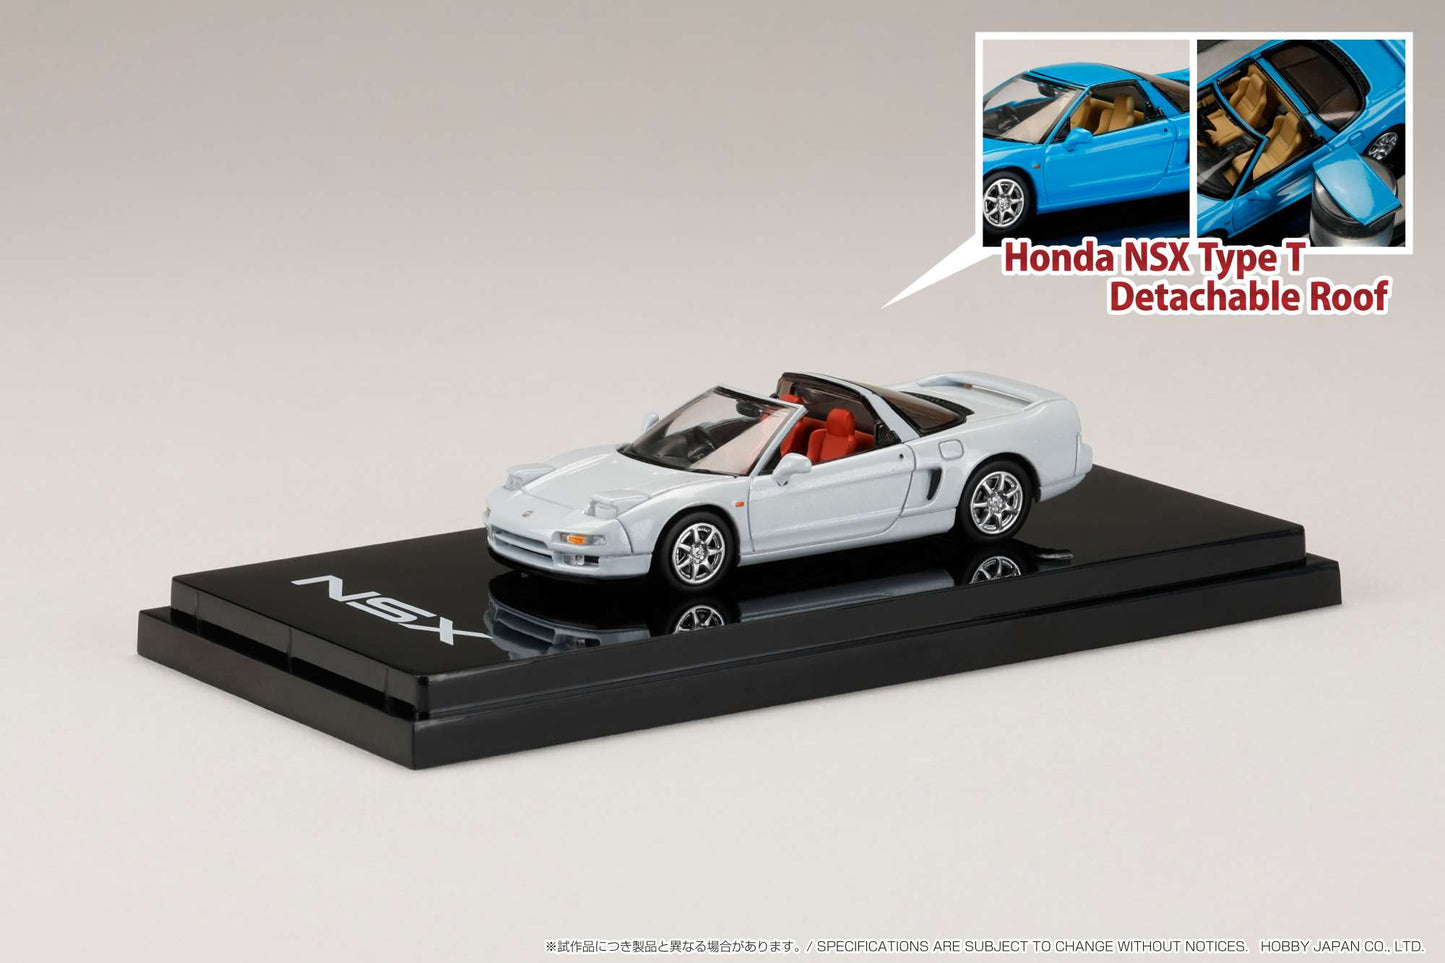 Hobby Japan 1/64 Honda NSX Type T with Detachable Roof in Platinum White Pearl